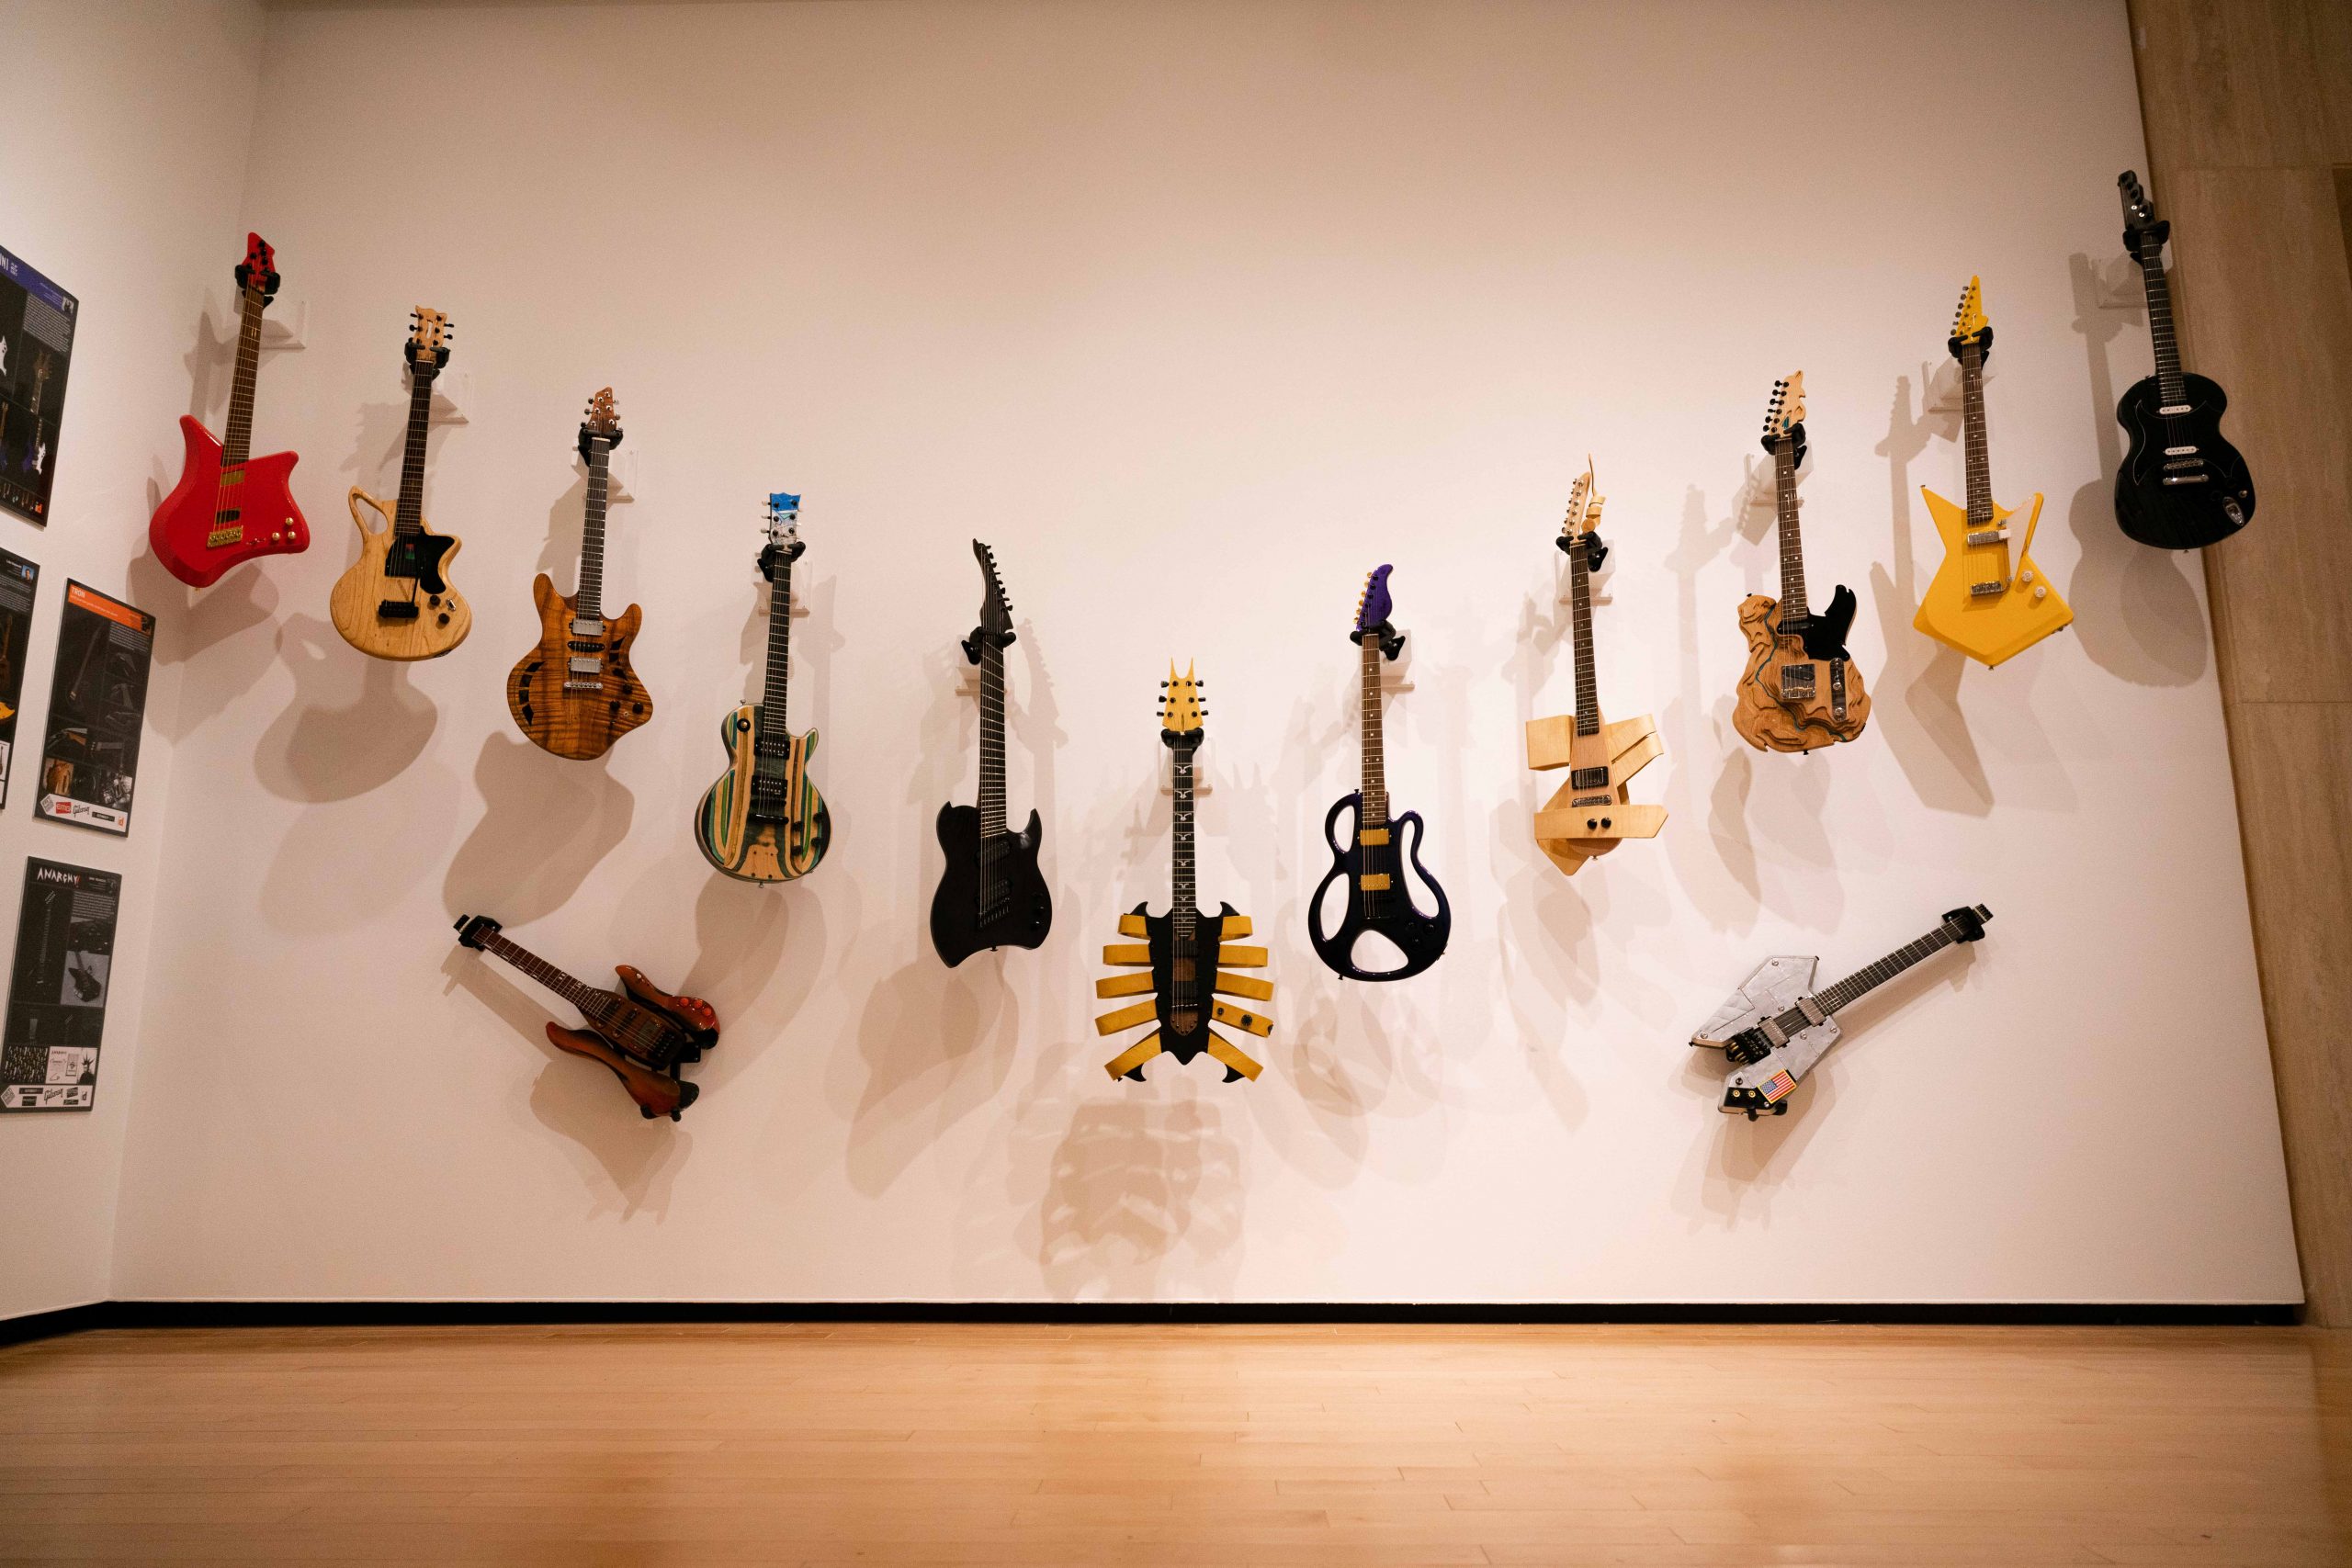 Uniquely decorated electric guitars arranged in a V pattern on a wall